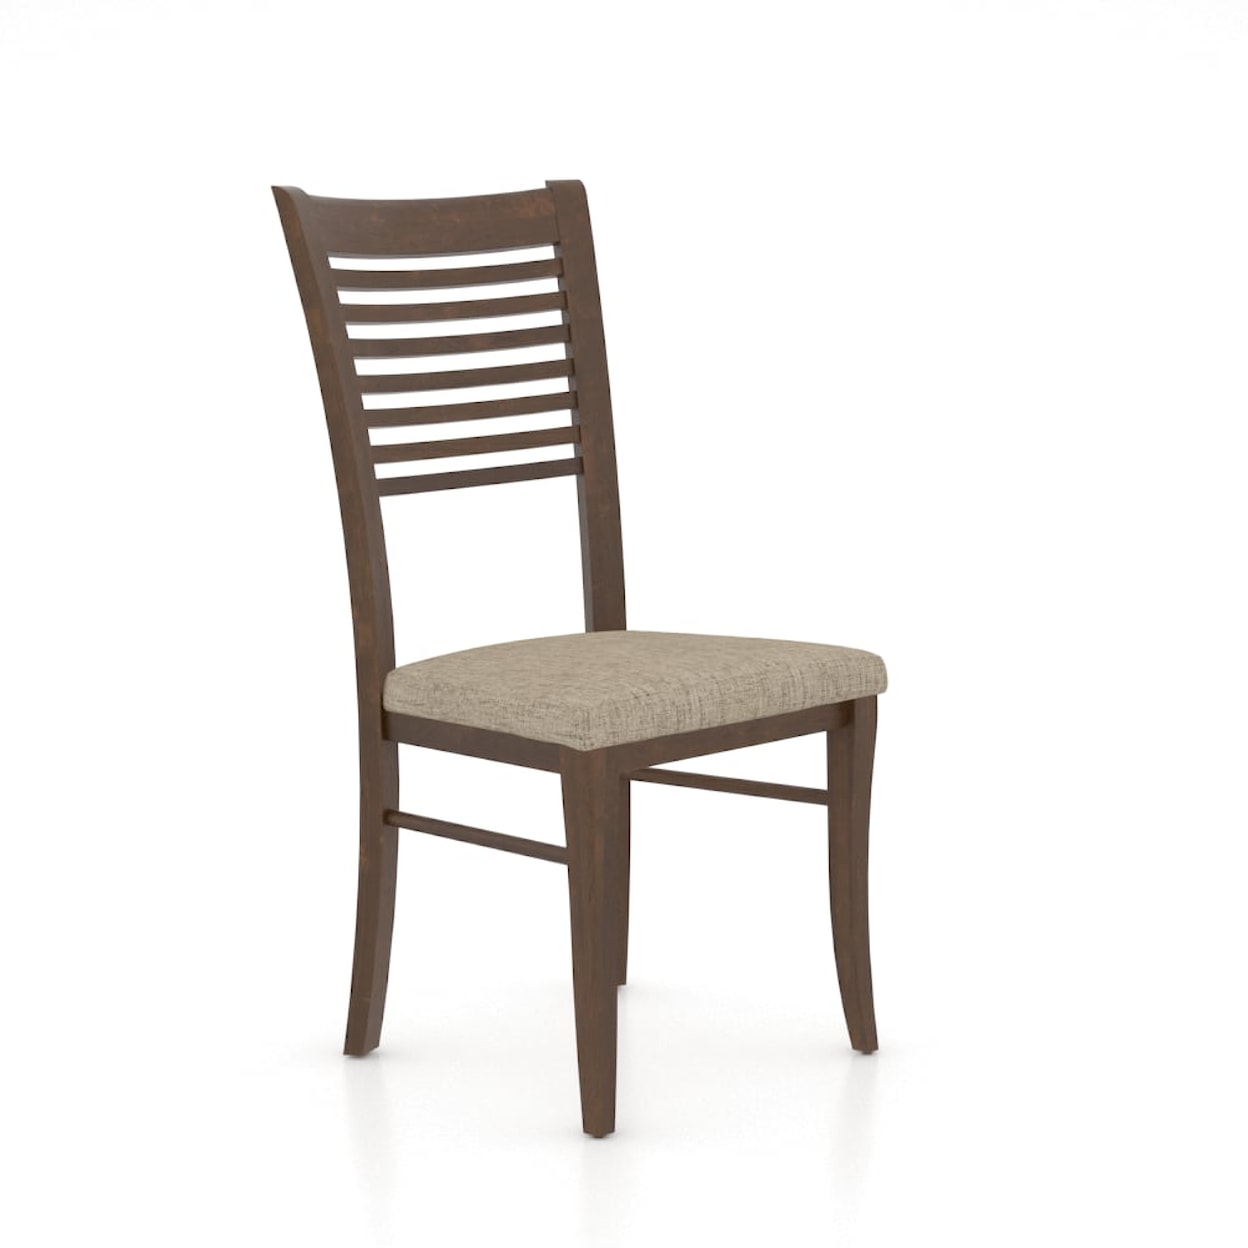 Canadel Canadel Upholstered side chair